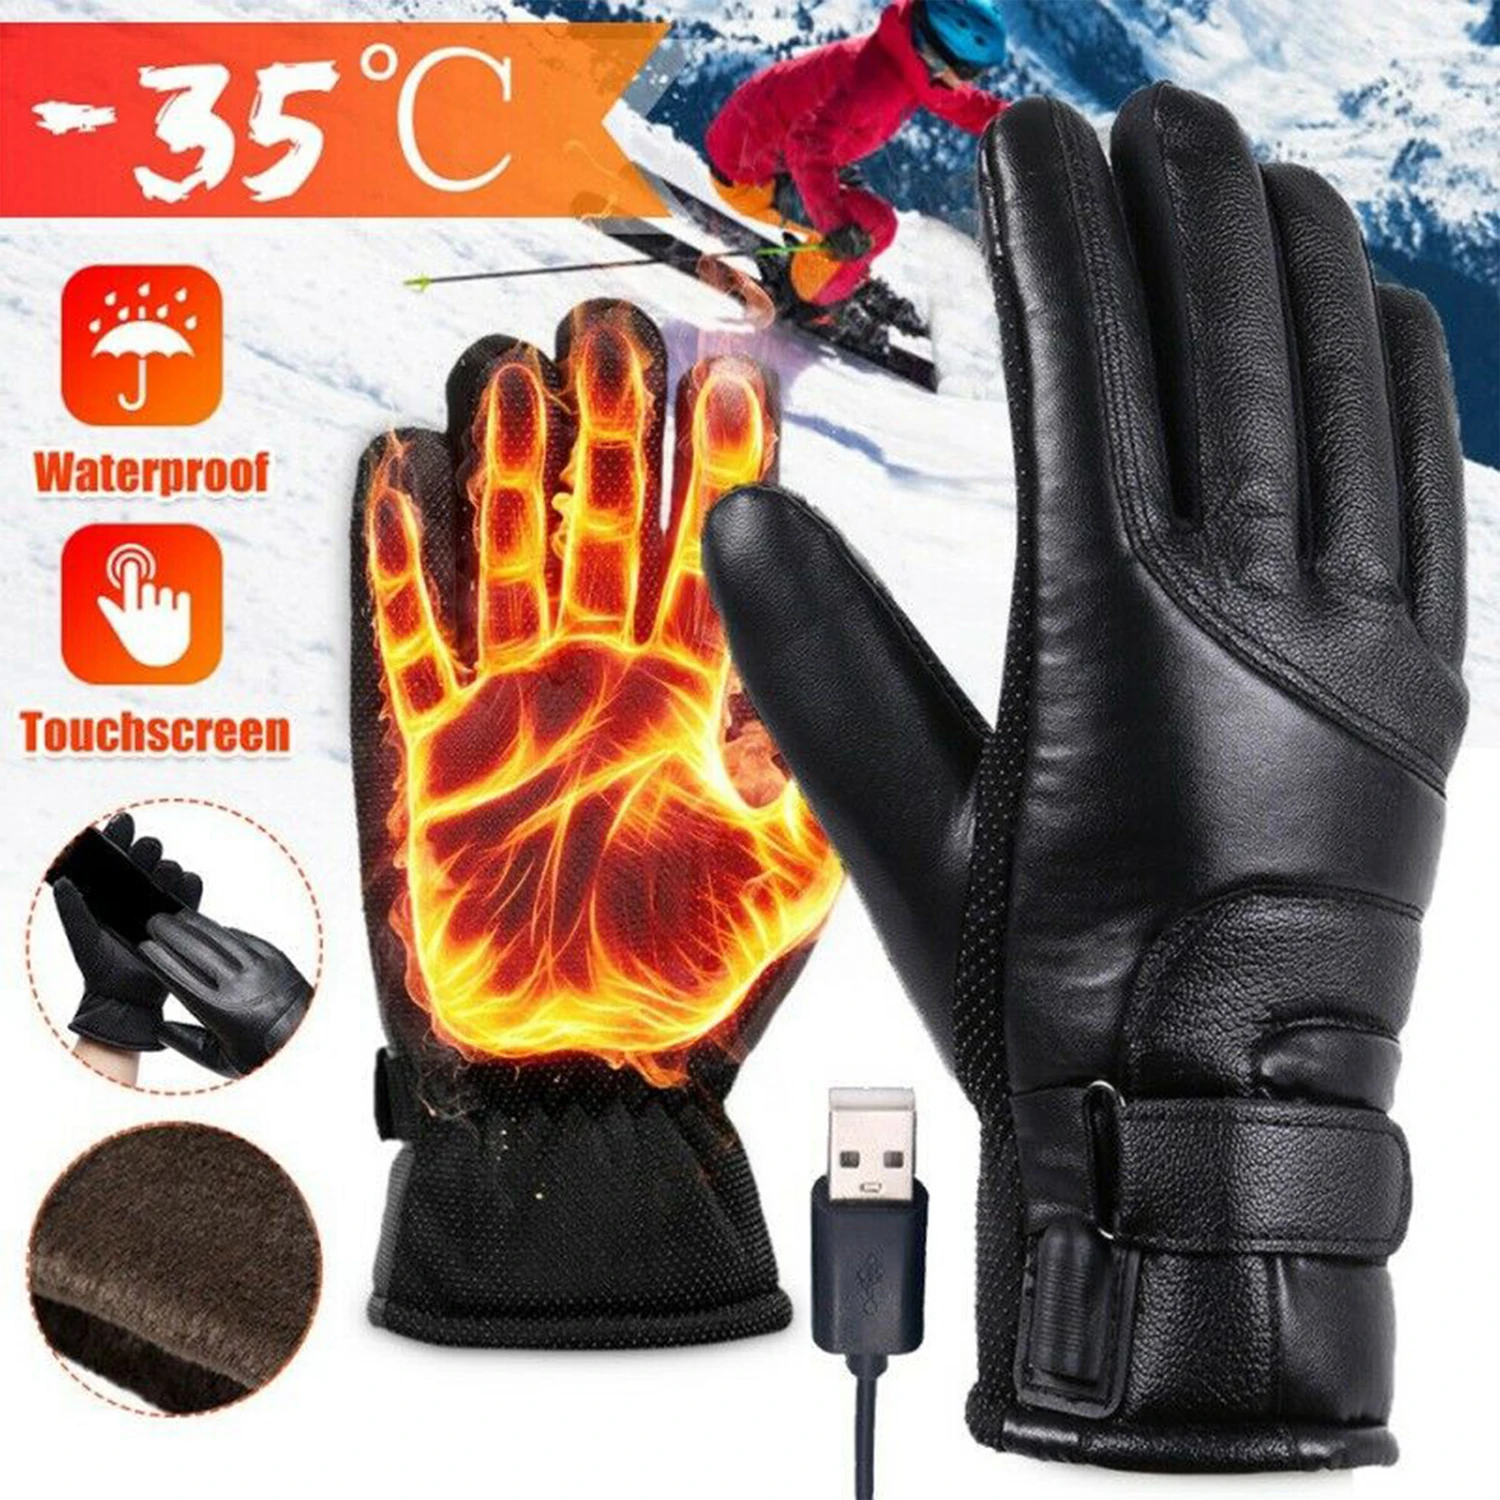 Heated Full Finger Mittens Touch Screen USB Electric Heating Gloves Windproof Constant Temperature for Skiing Riding Hiking